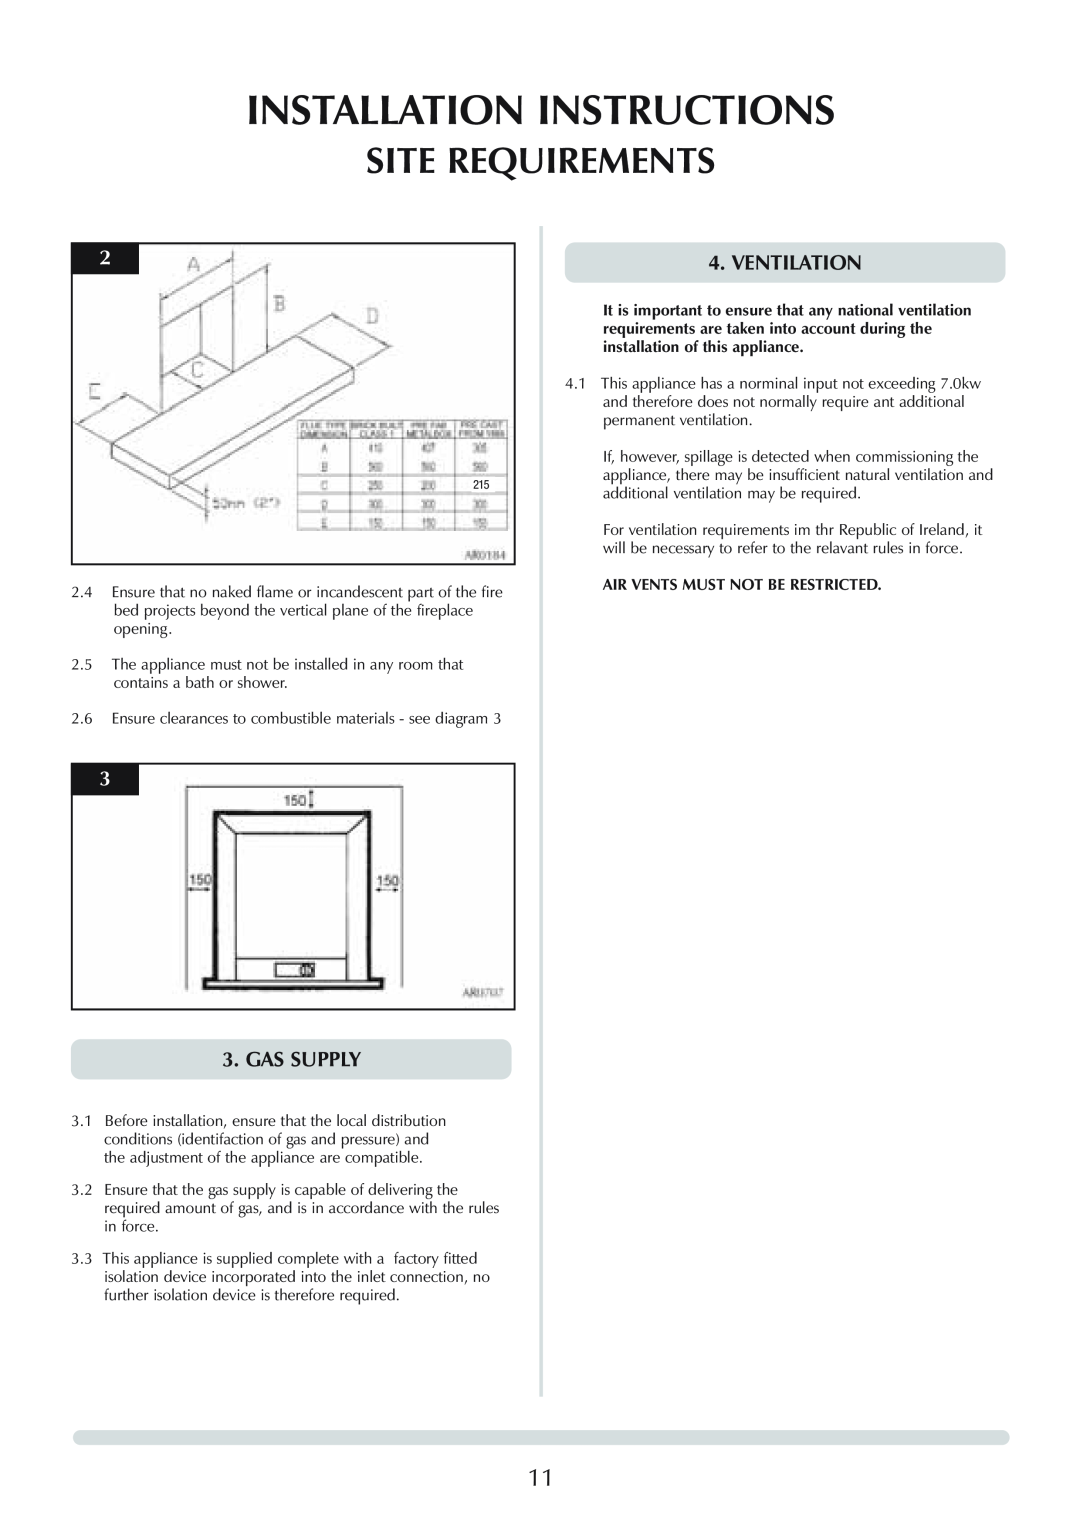 Stovax Logic Hotbox & Convector Fire manual Installation Instructions, Site Requirements, Gas Supply, Ventilation 